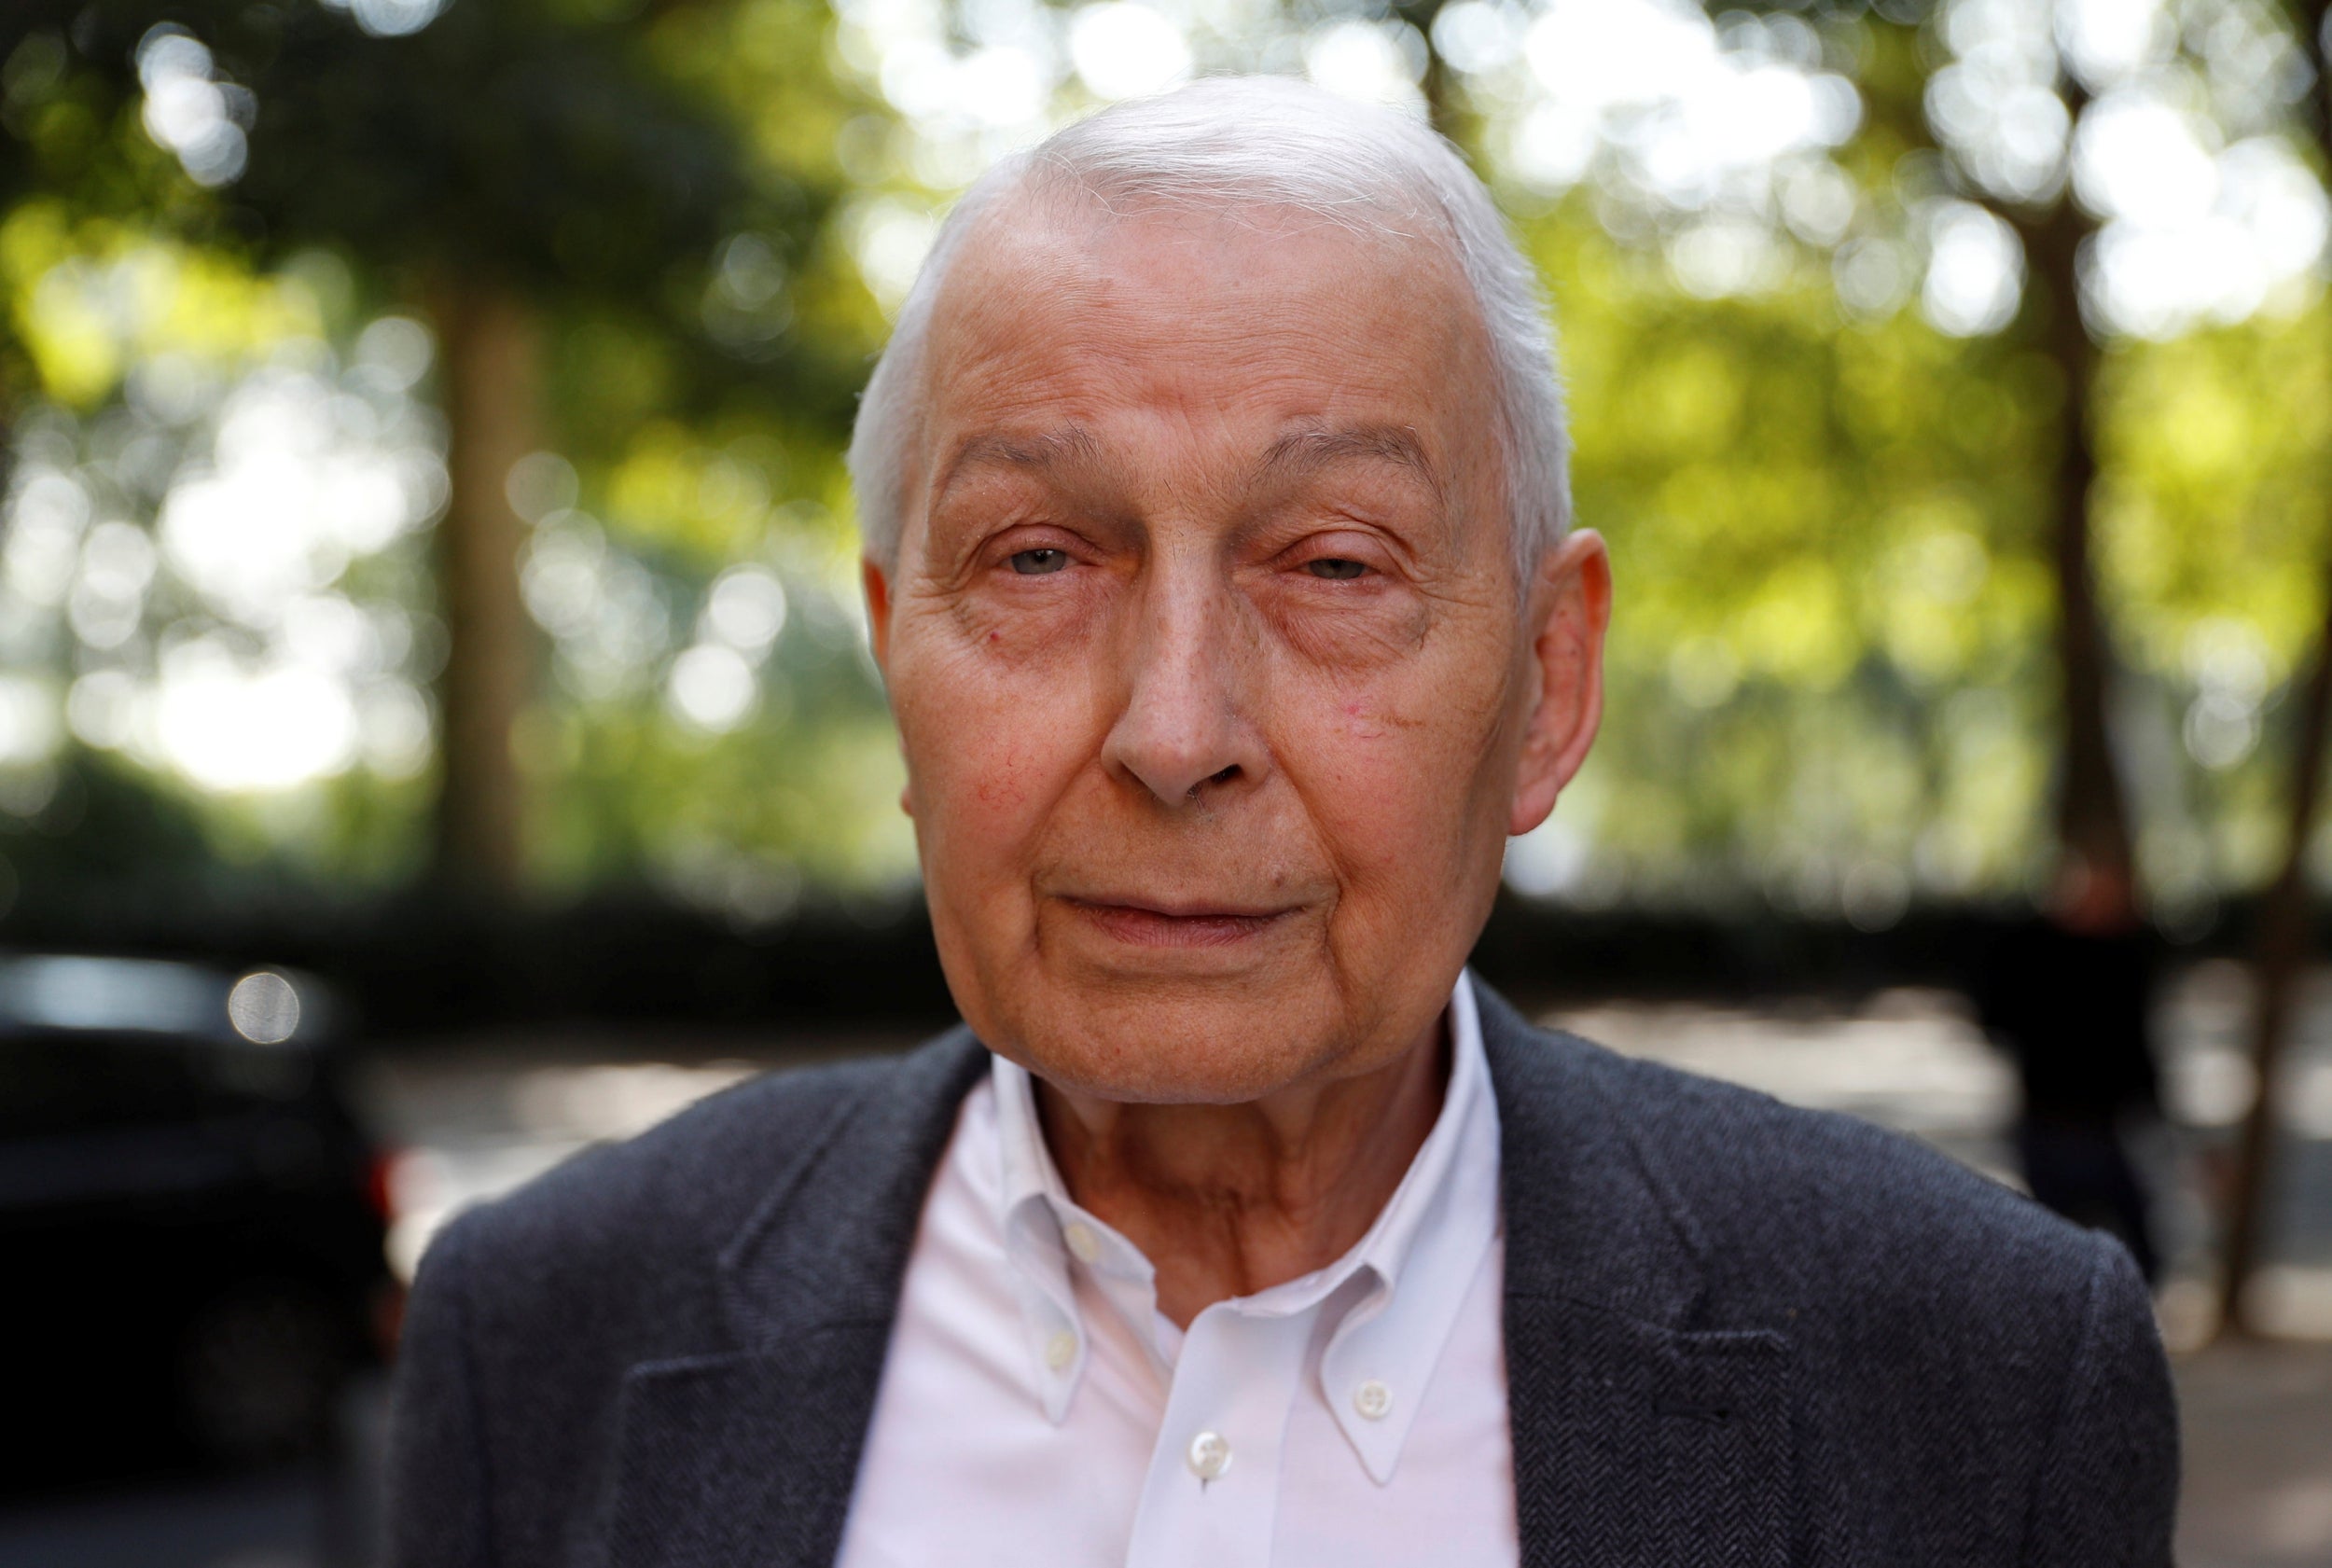 Frank Field was the Labour MP for Birkenhead for almost 40 years’